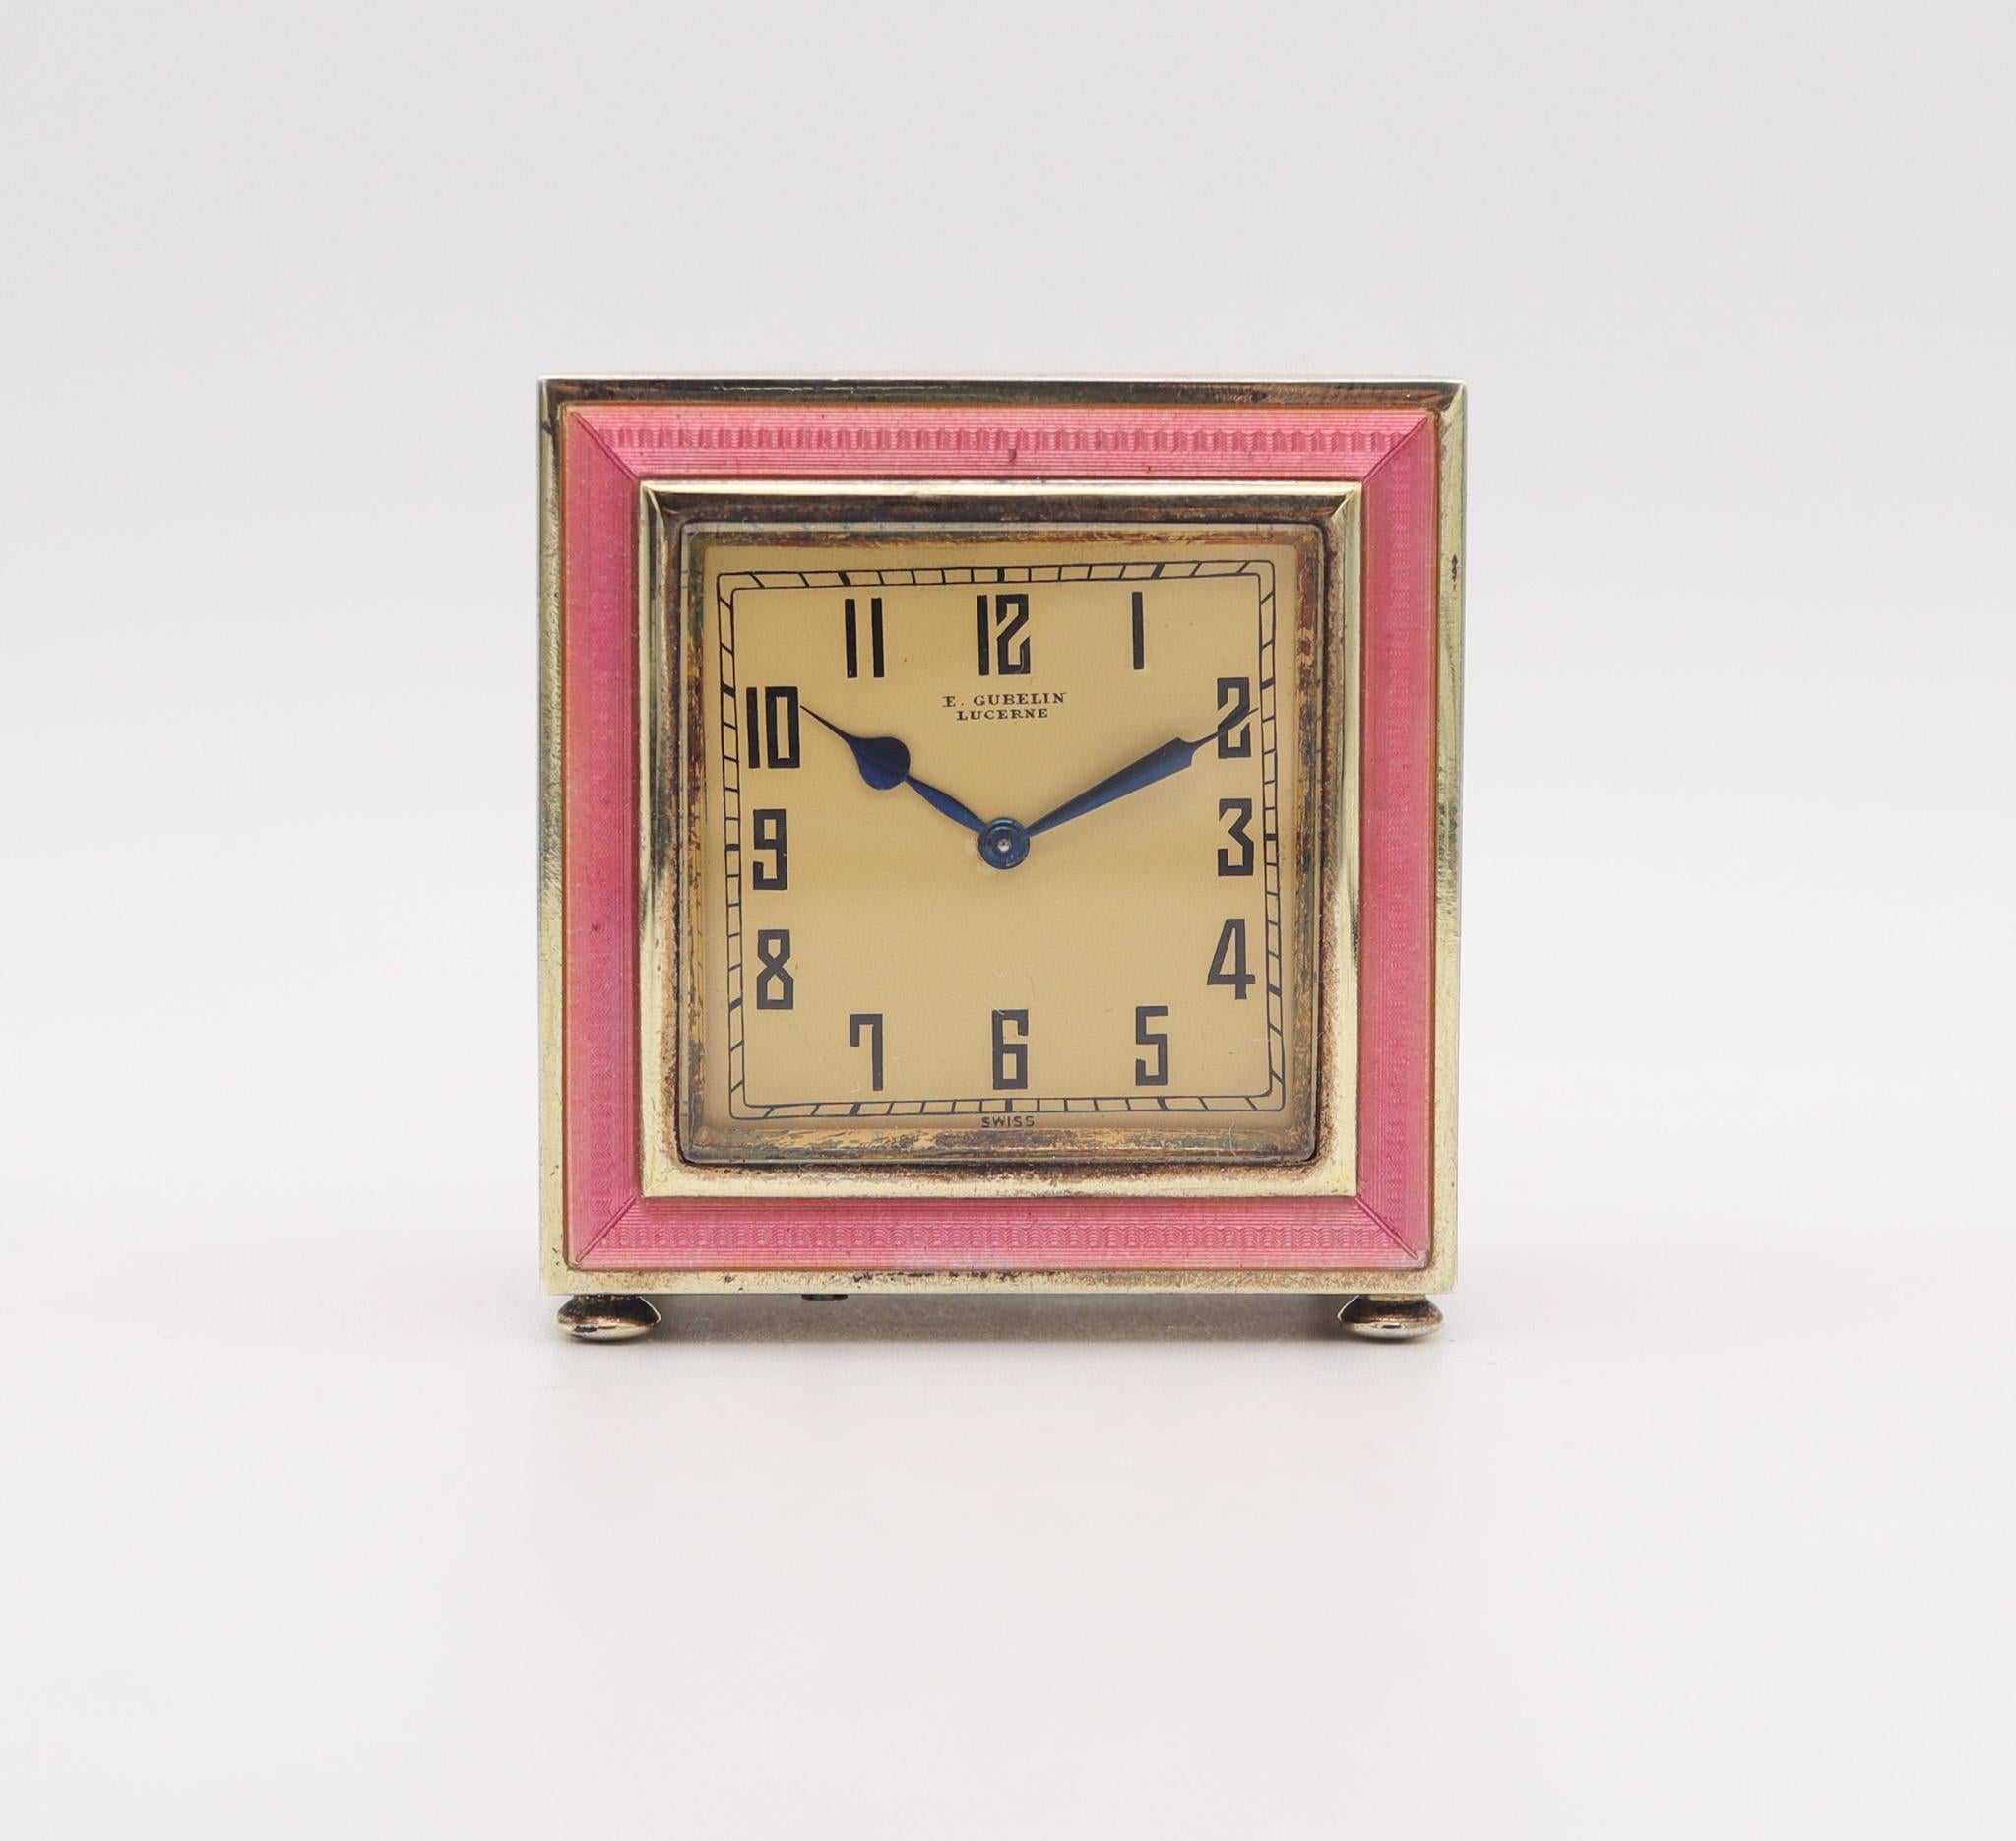 Art deco miniature boudoir desk clock made by Gübelin.

Fabulous miniature desk clock, created in Lucerne Switzerland by the E Gübelin & Co. during the art deco period, back in the 1925. The craftsmanship of this boudoir clock is exceptional,